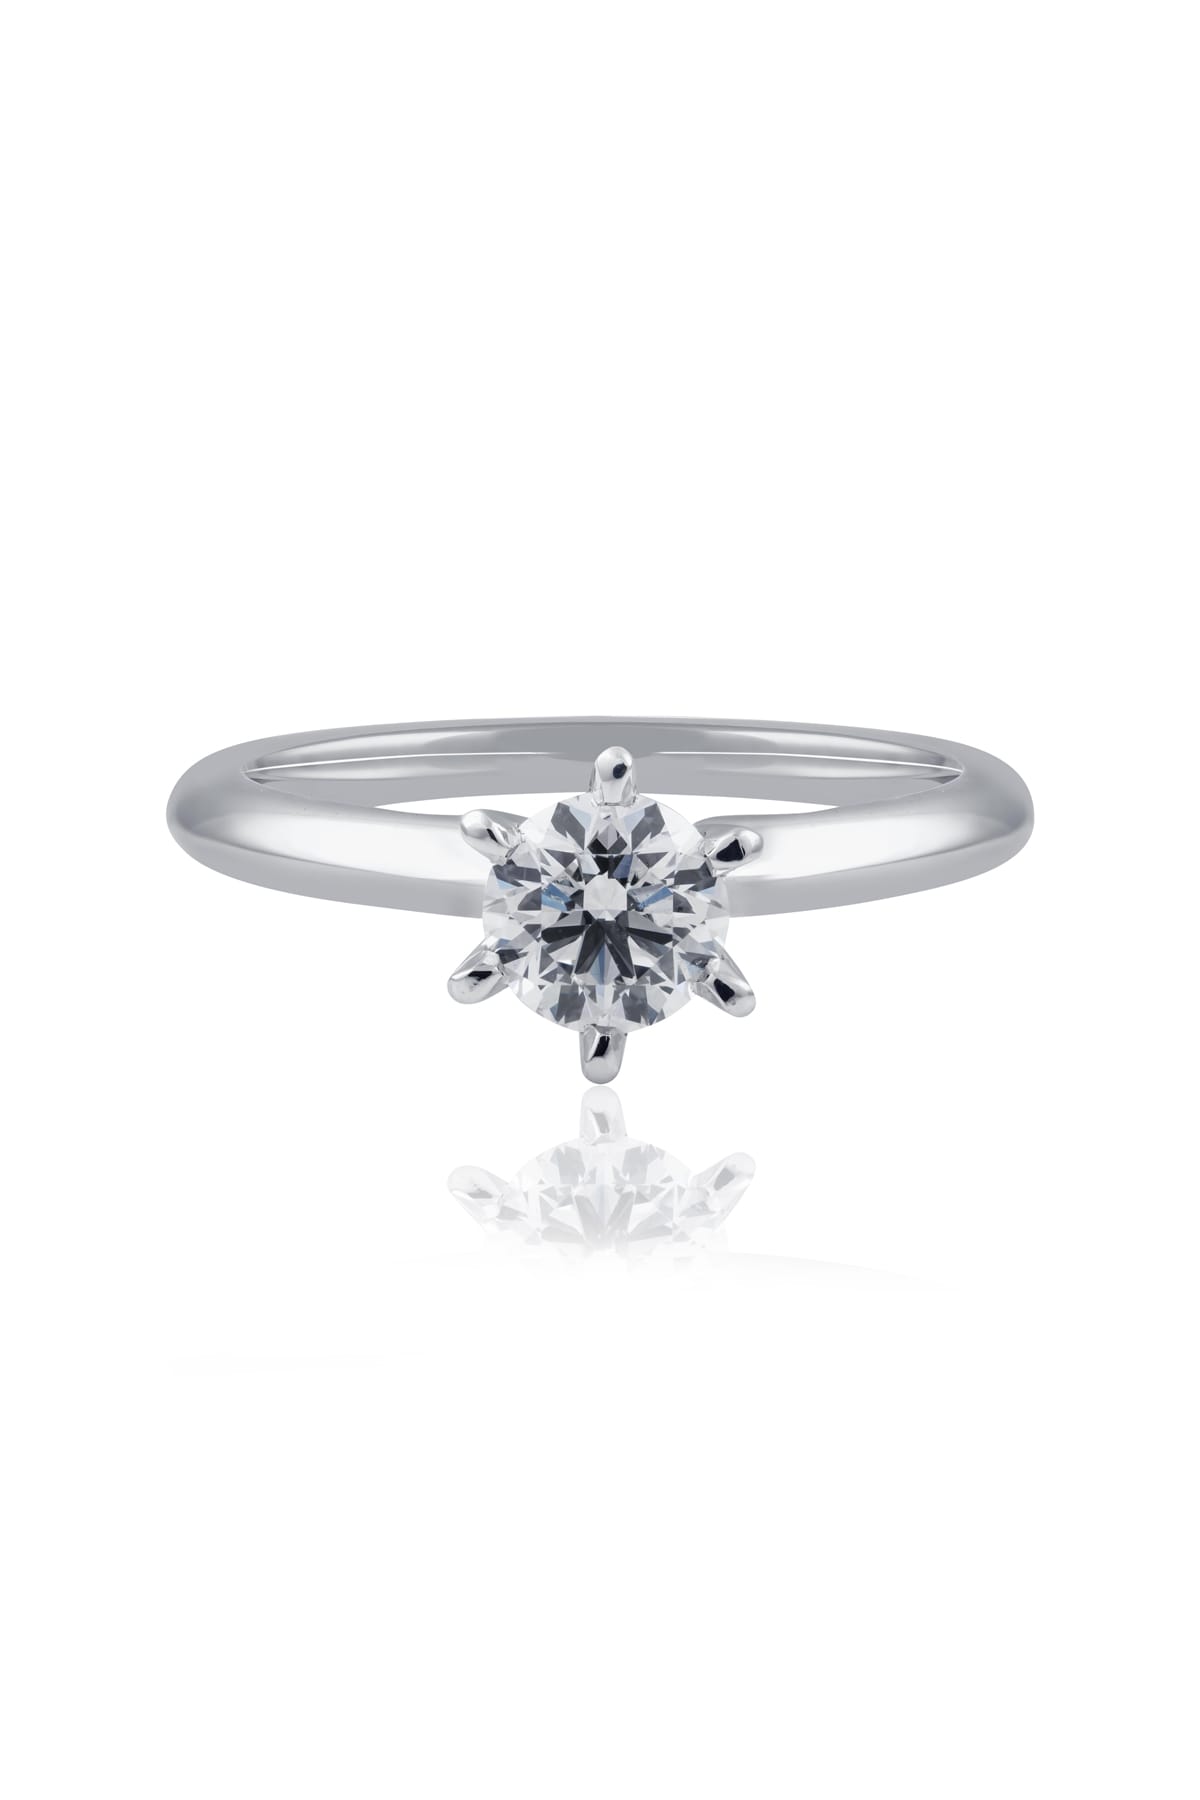 0.70ct Diamond Solitaire Engagement Ring With 6 Claw Setting In White Gold from LeGassick